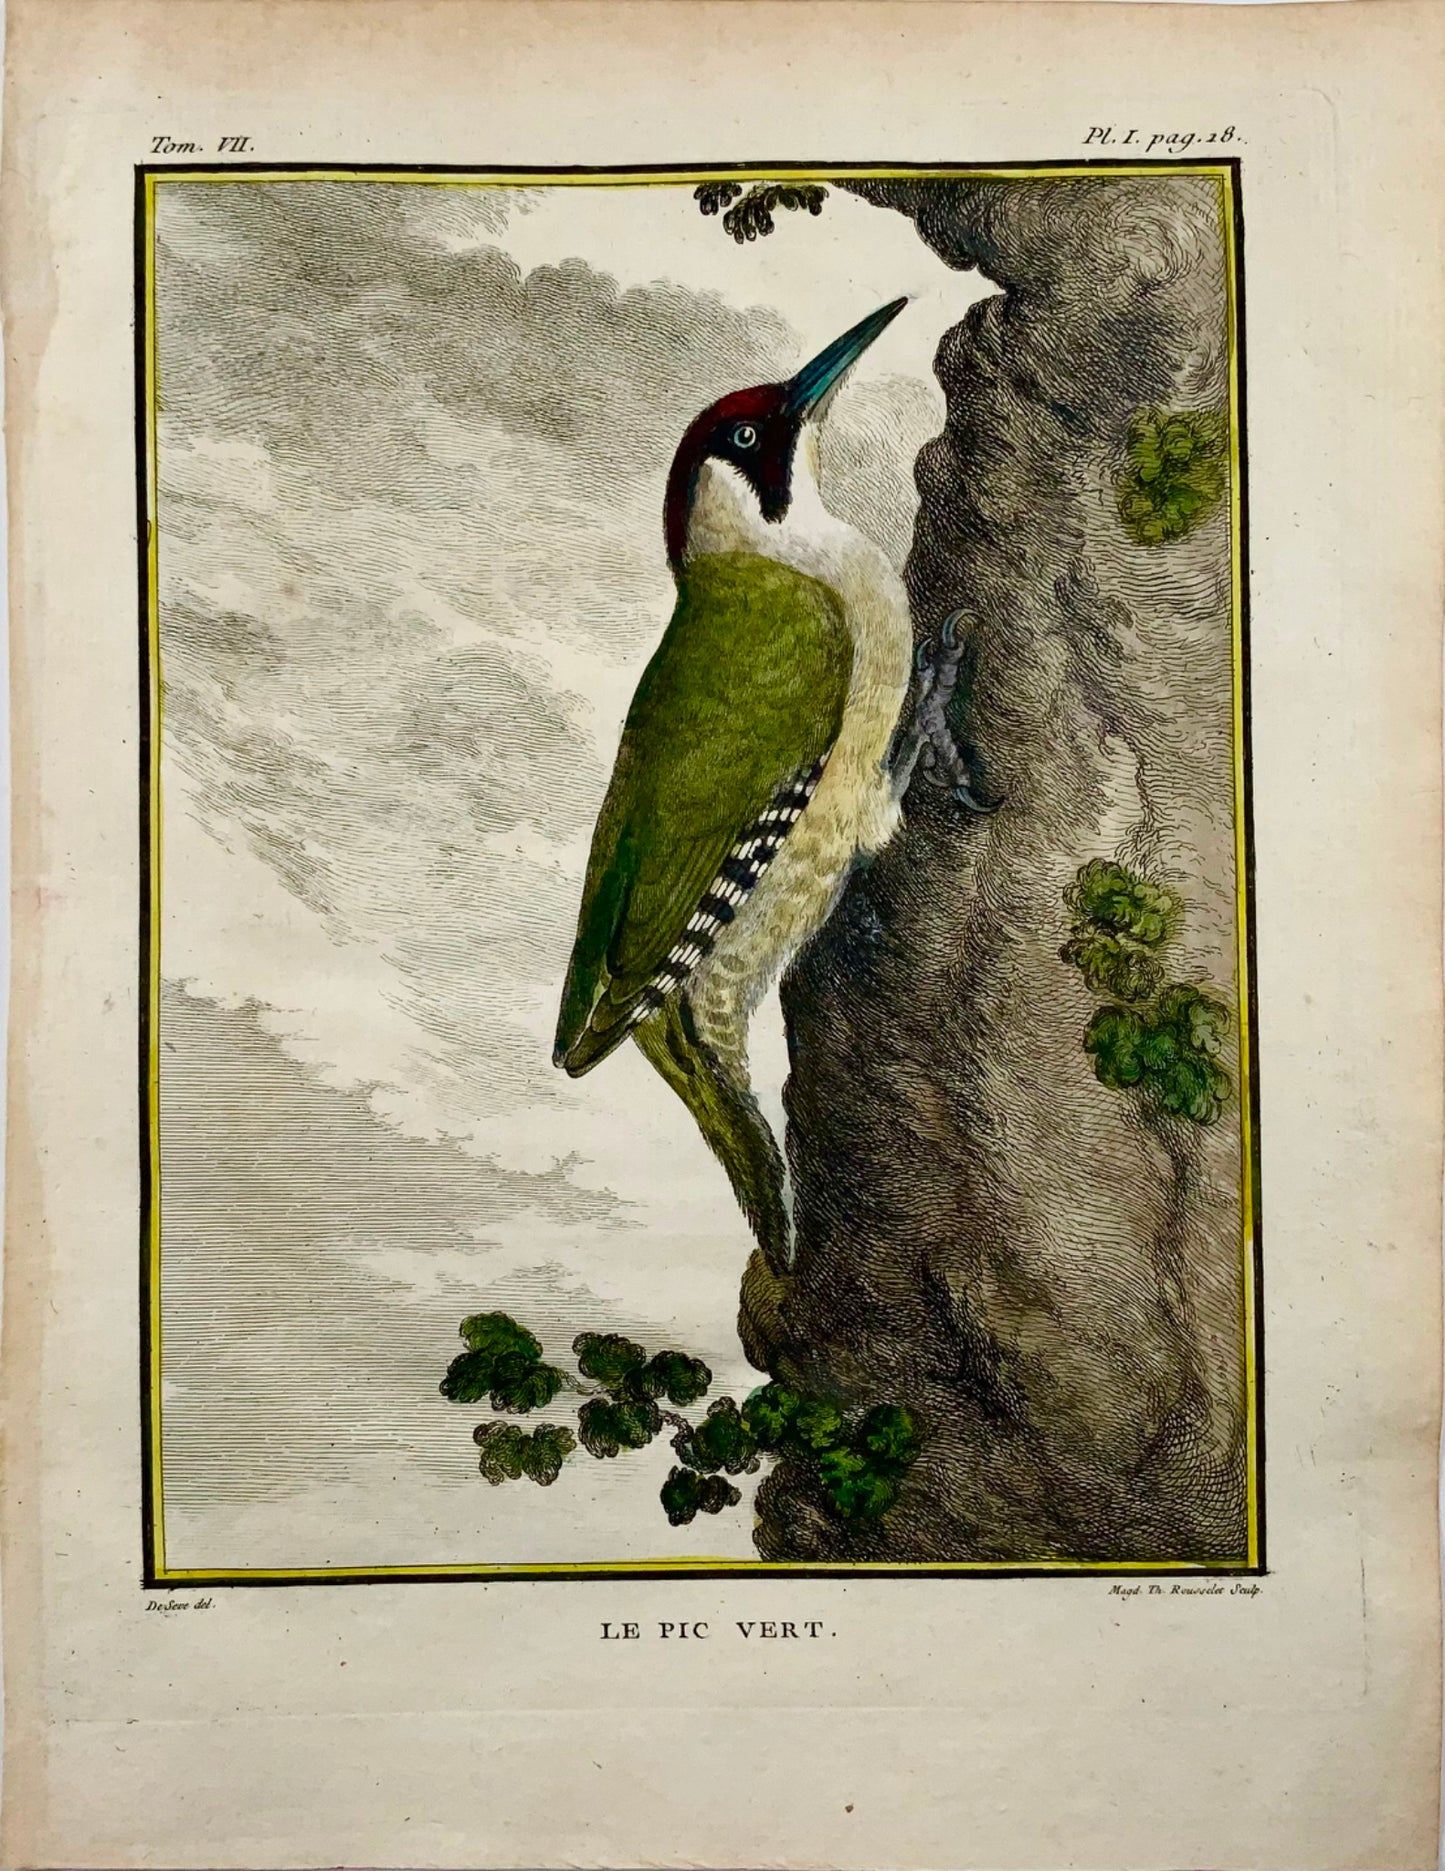 1771 Pic, De Seve, ornithologie, édition grand in-4to, gravure 